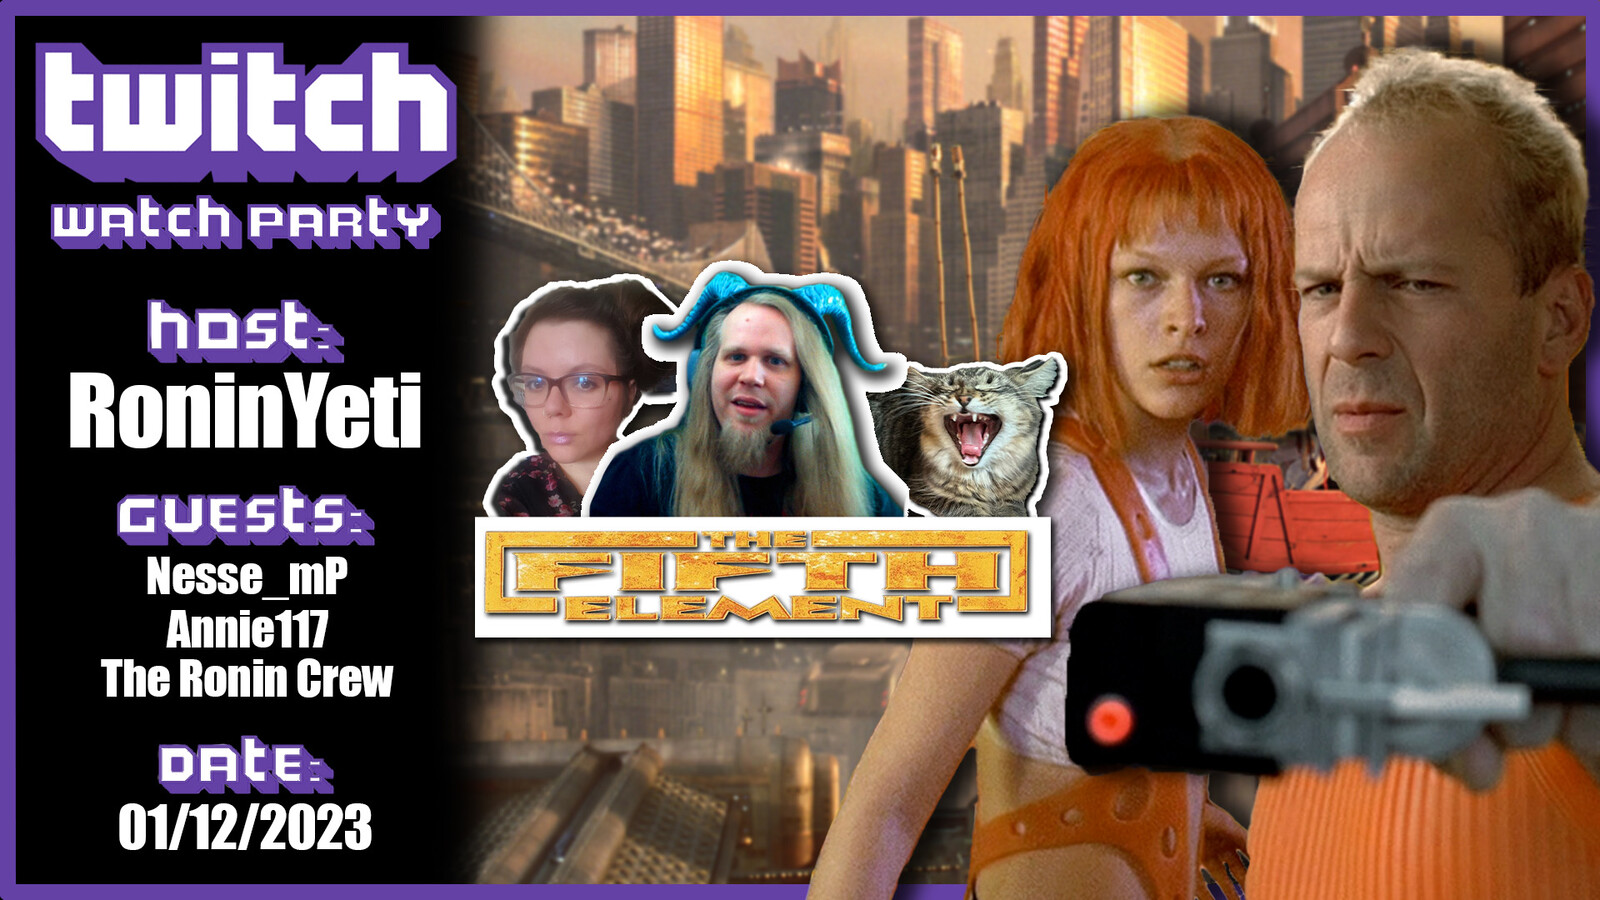 "The Fifth Element" Twitch Watch Party Advert